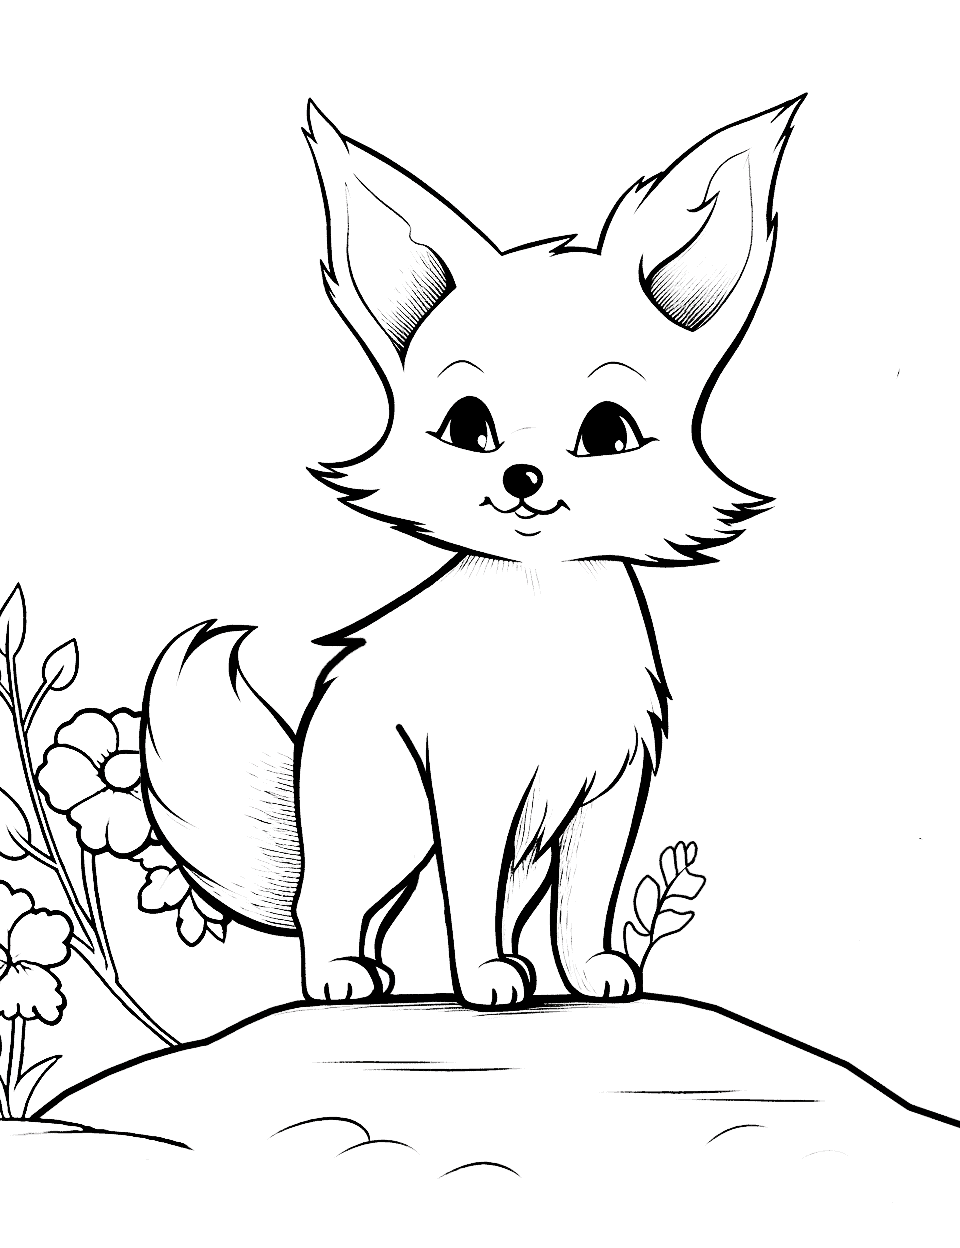 Baby Fox's First Steps Fox Coloring Page - A tender scene showing a fox cub taking its first steps.